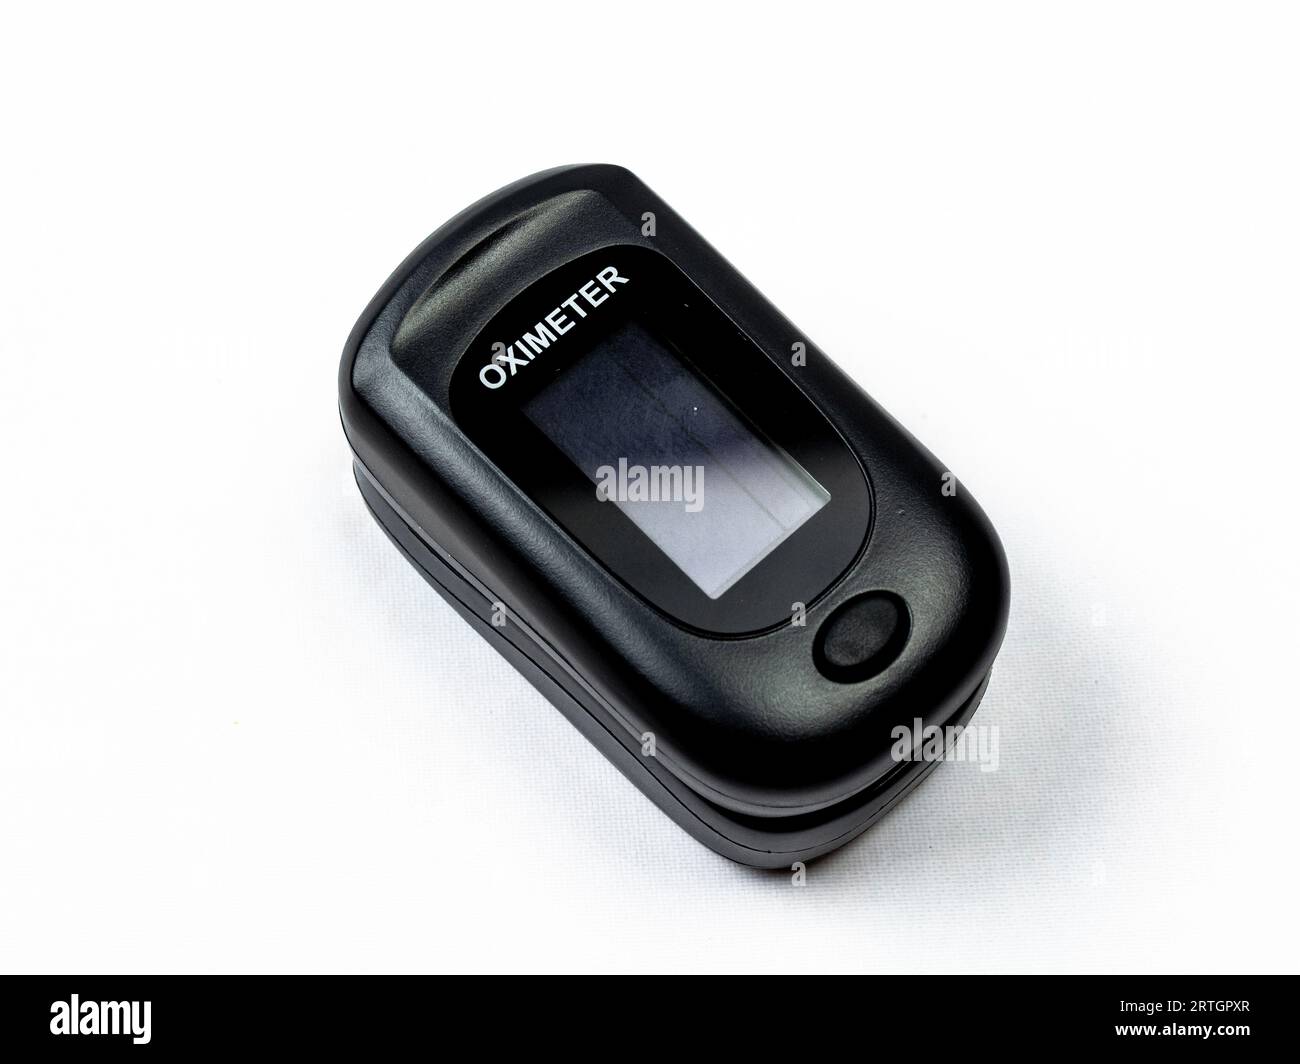 Digital pulse oximeter photographed on a white background in high key. Medical instruments. Stock Photo